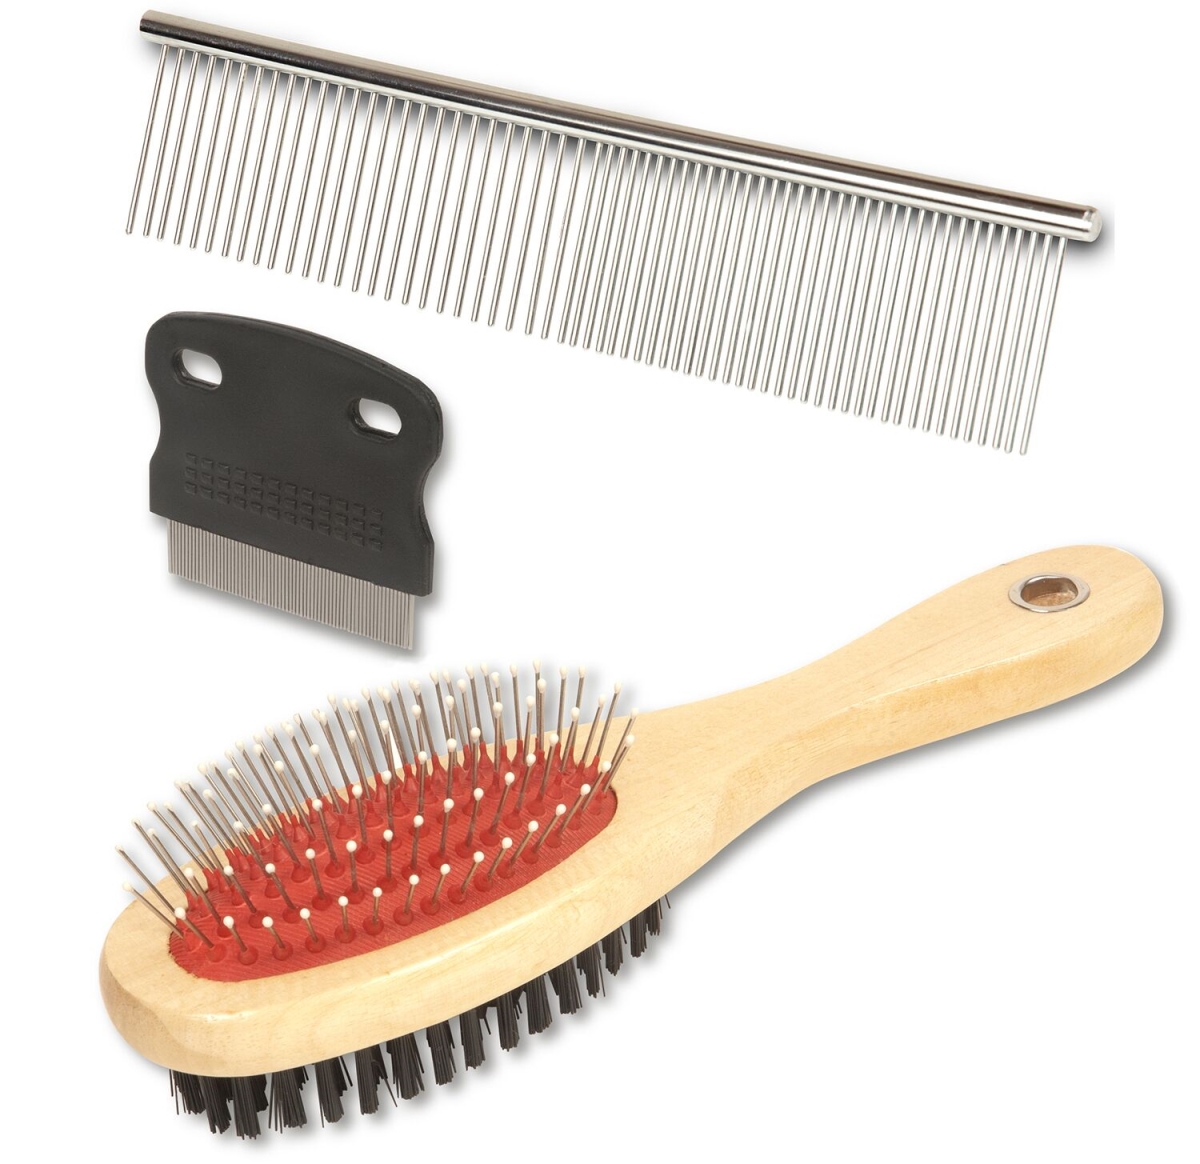 Cp003 Grooming Tools Kit For Cats & Dogs